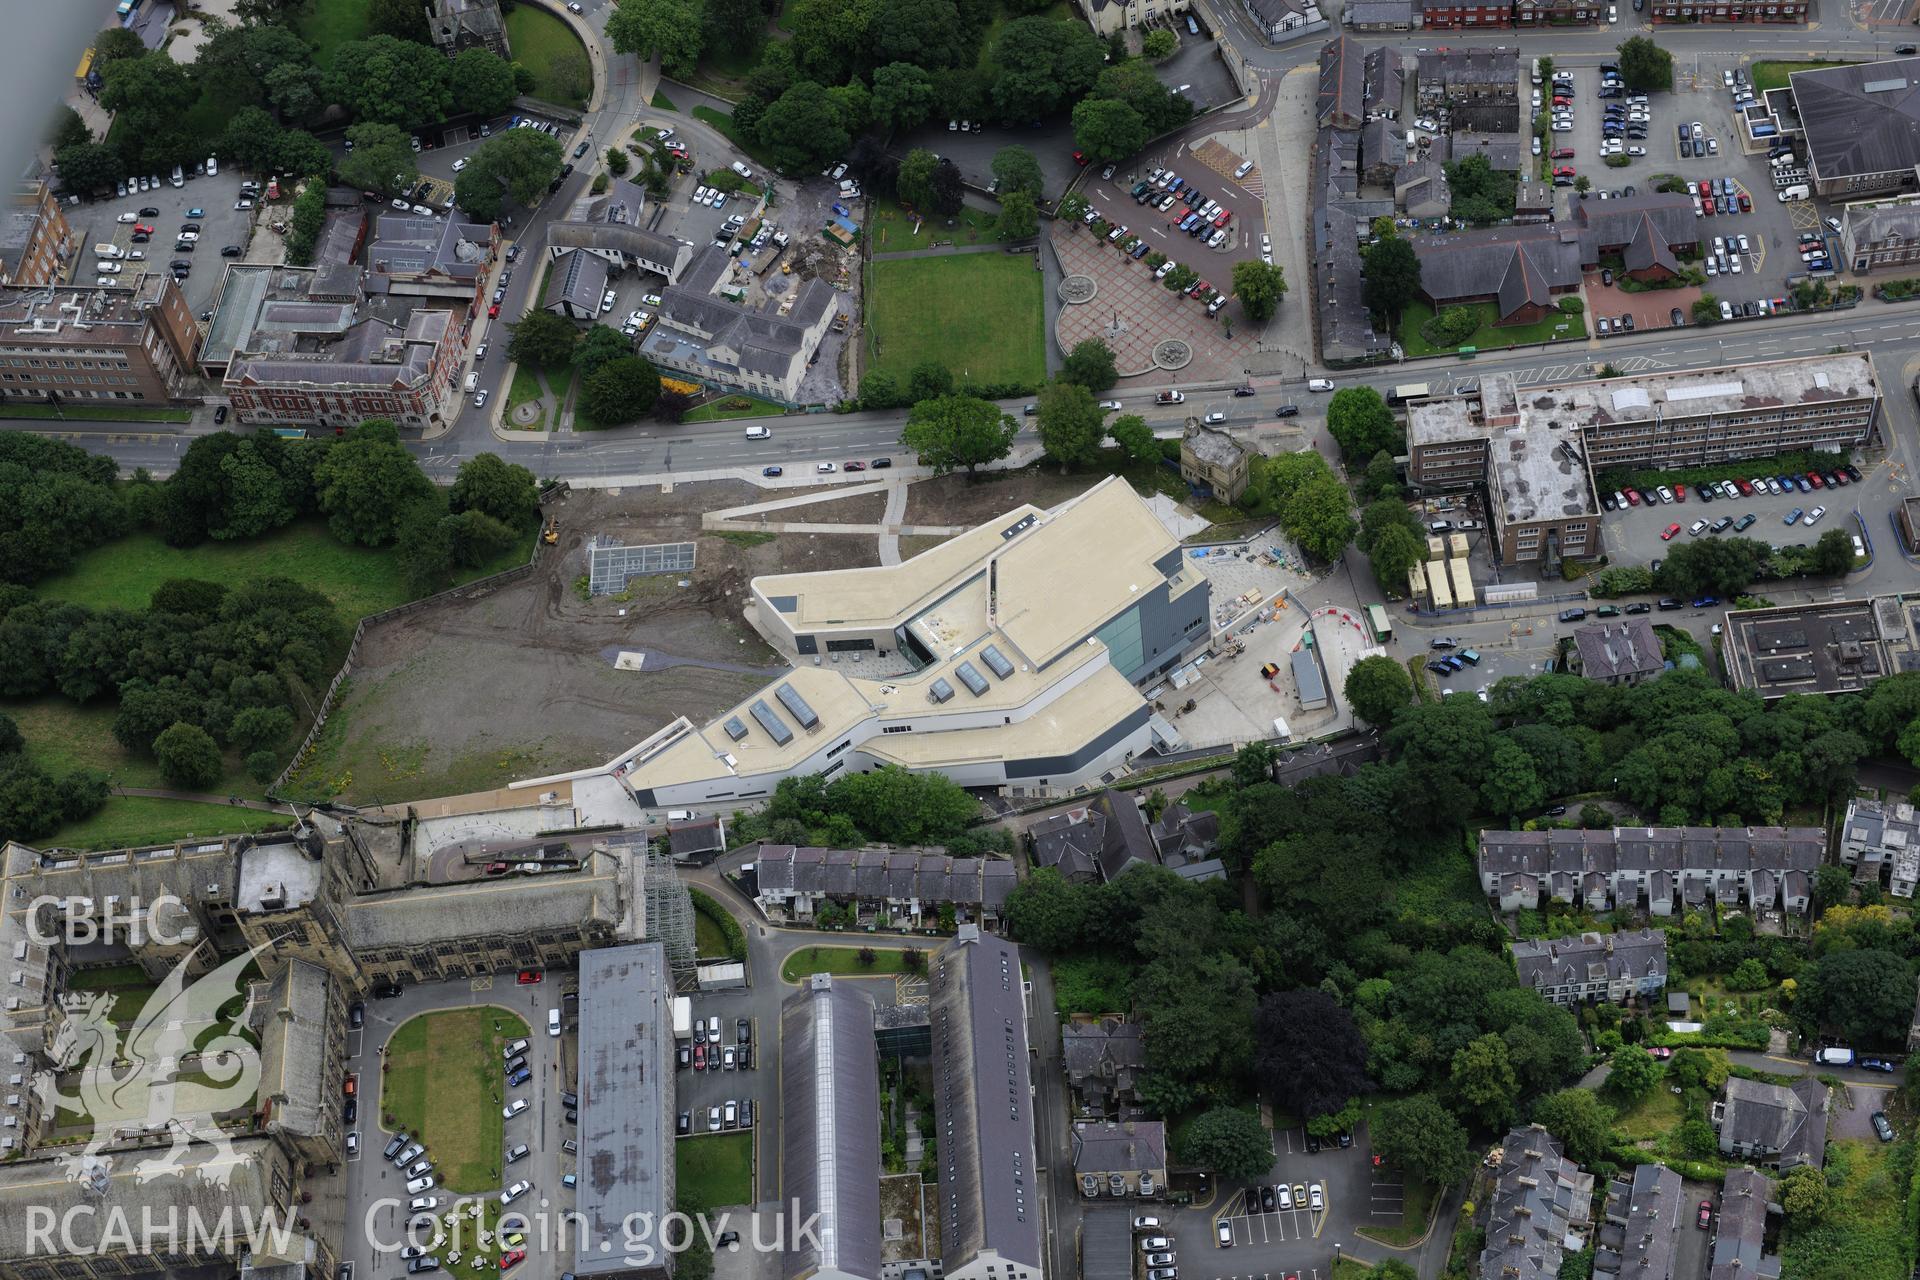 Bangor University, Theatr Gwynedd(demolished),Pontio, medieval church site, town hall, library & war memorial. Oblique aerial photograph taken during the Royal Commission's programme of archaeological aerial reconnaissance by Toby Driver on 30th July 2015.